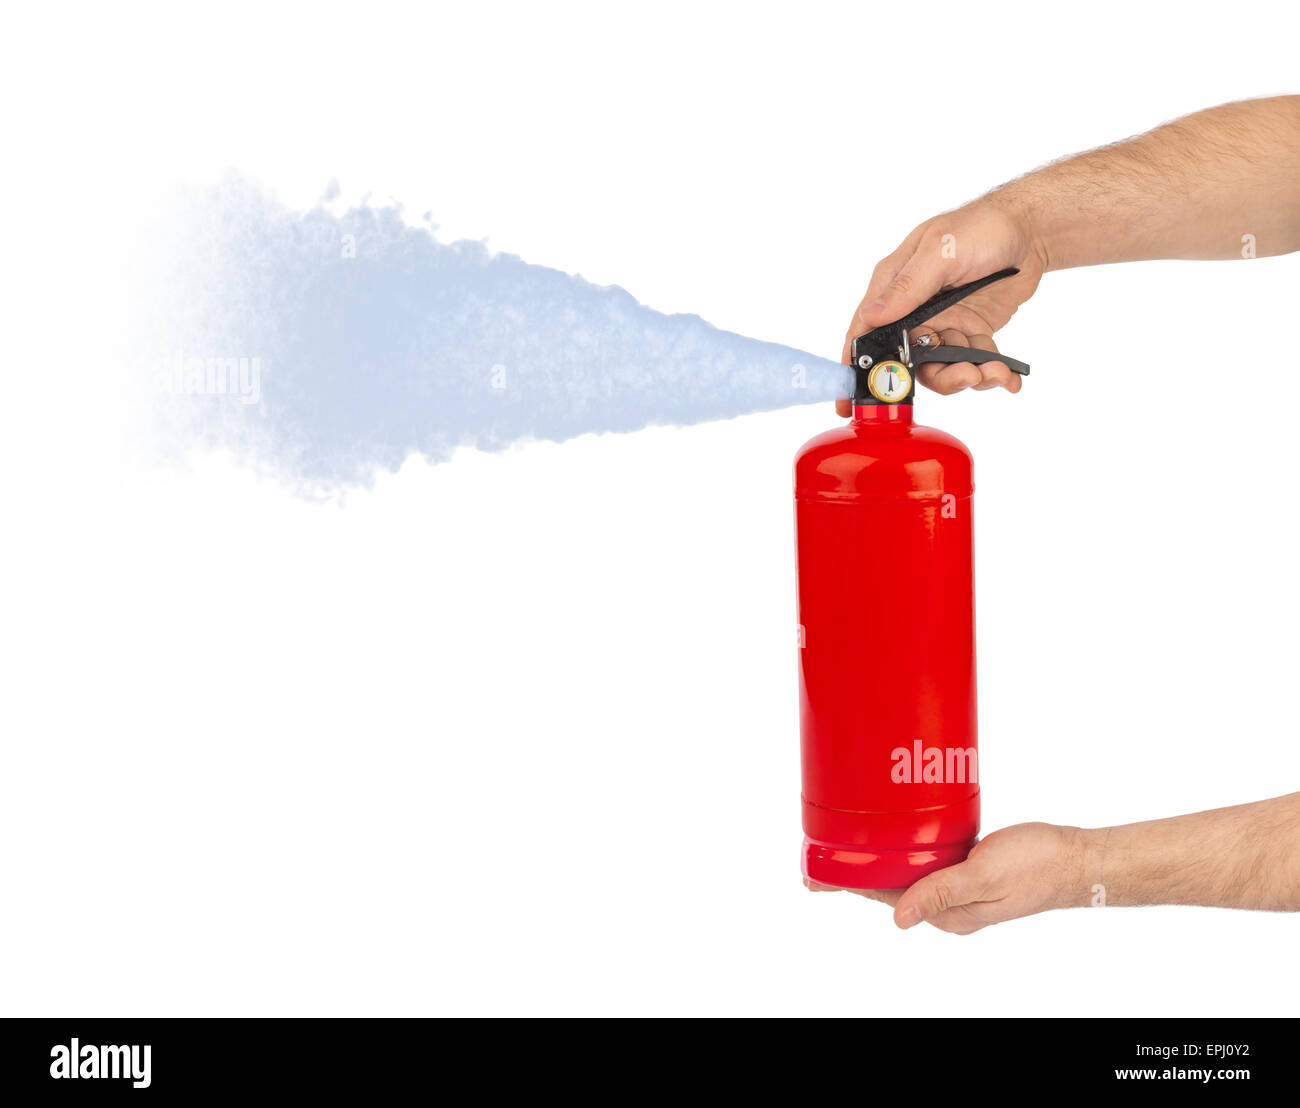 Hands with fire extinguisher Stock Photo